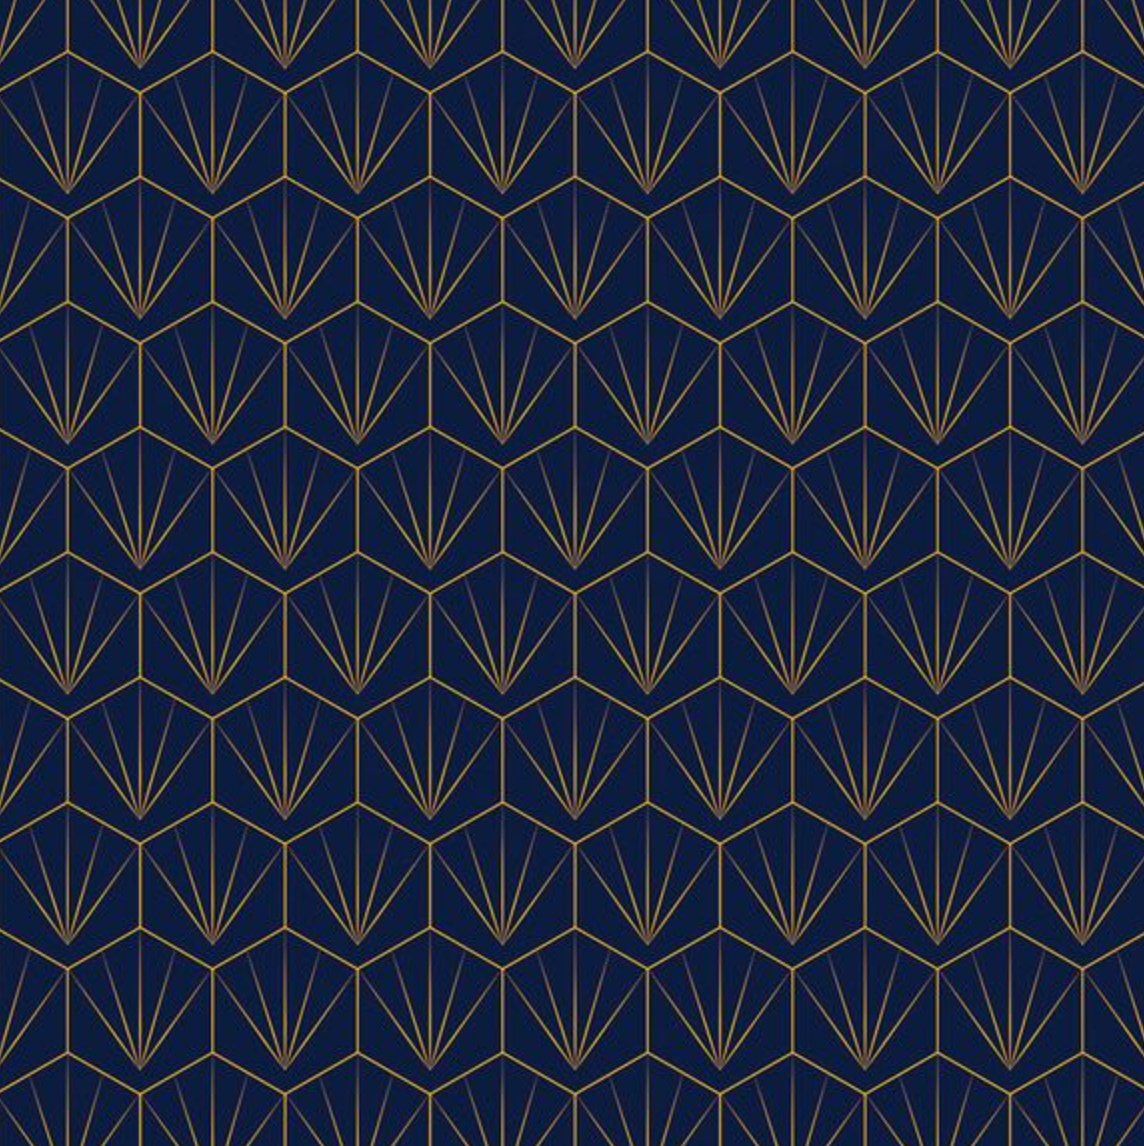 Showerwall Acrylic Patterns & Tiles Collection - Deco Tile Navy/Mustard